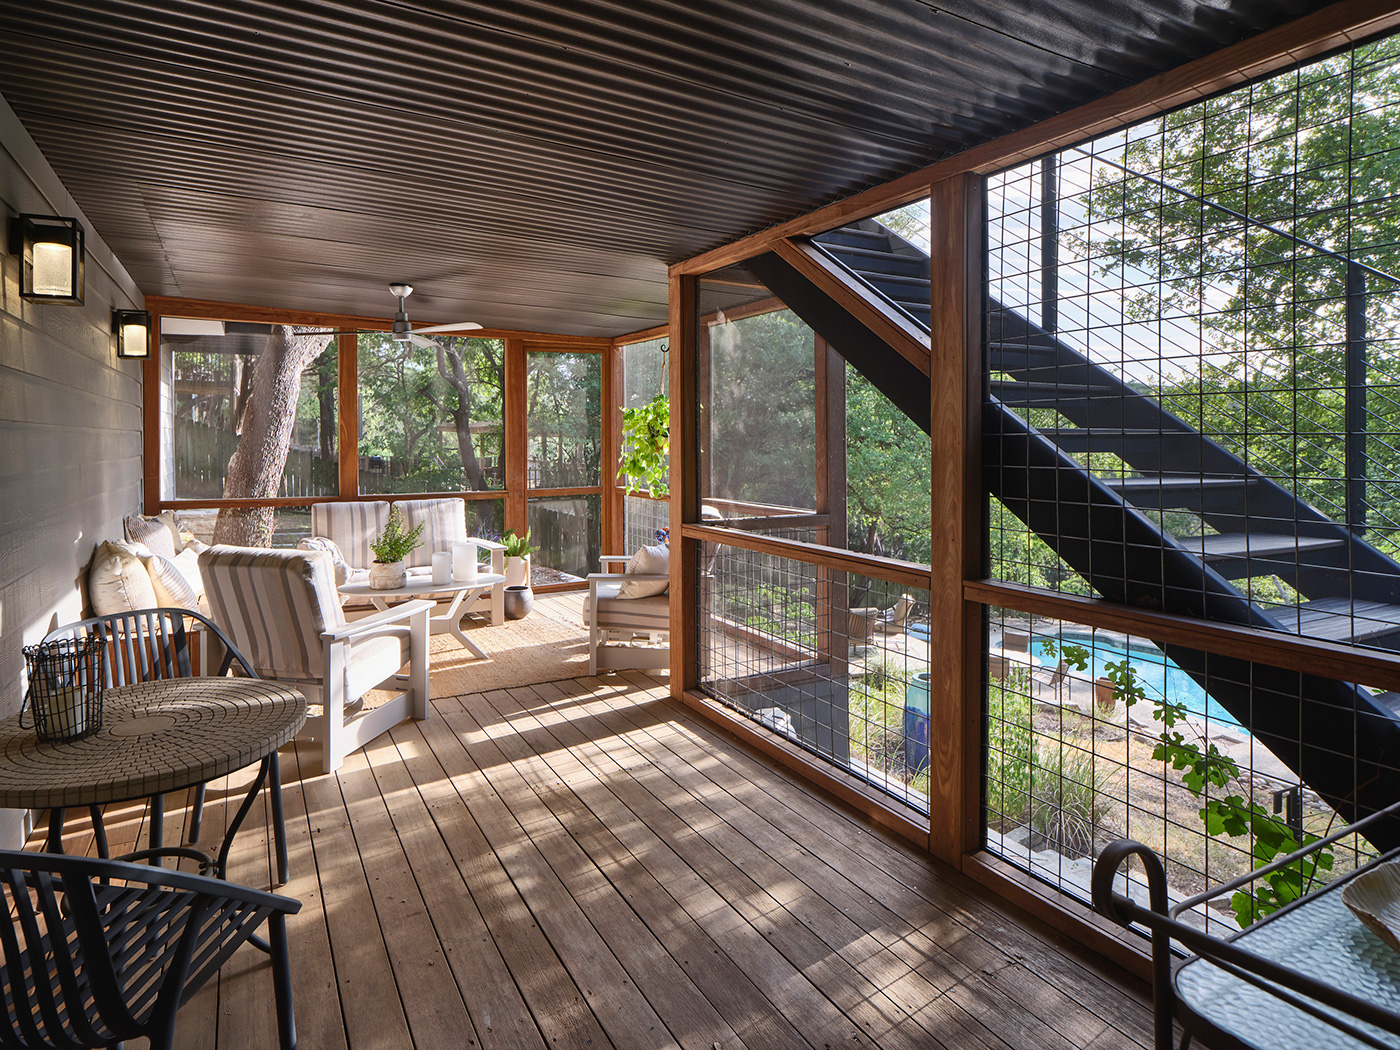 Screened in outdoor deck seating area that looks out to backyard pool.